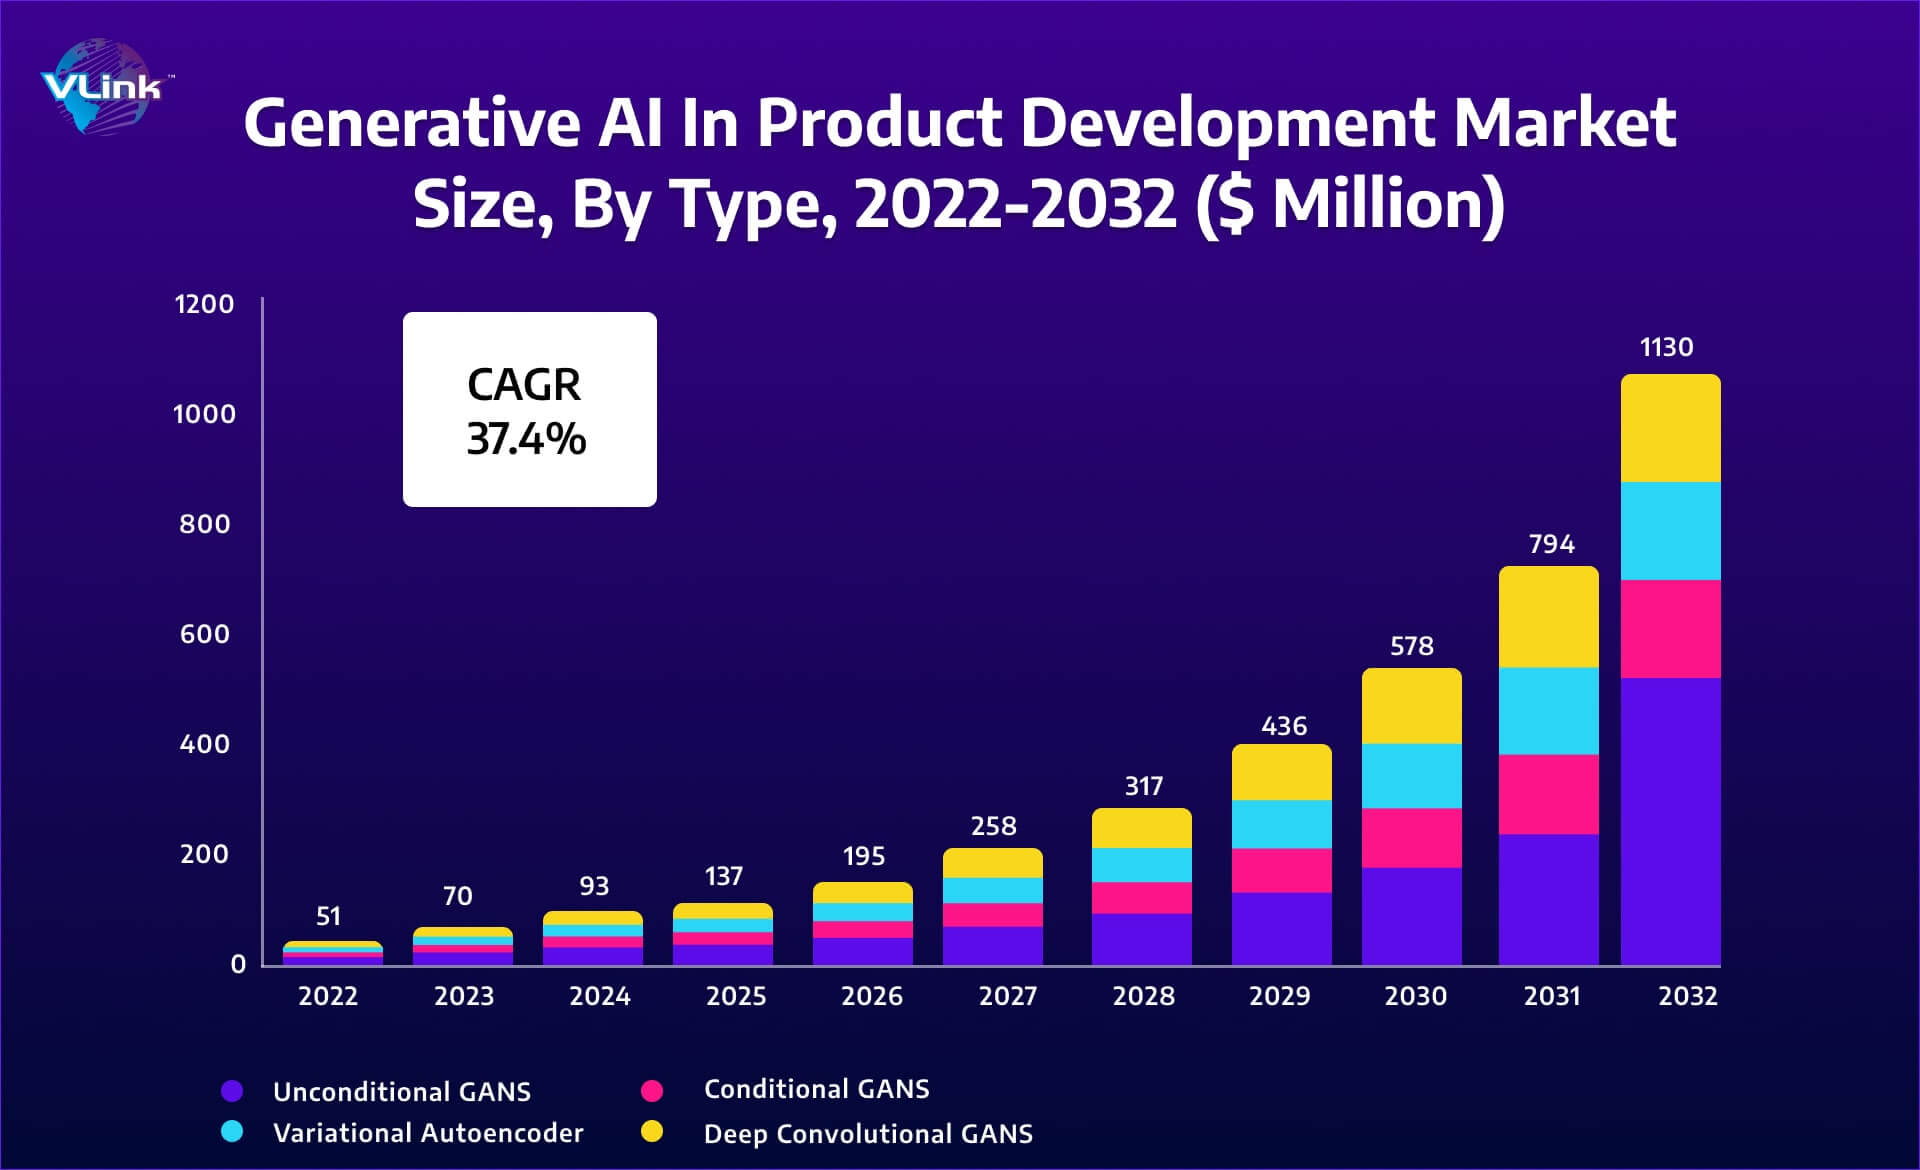 market size of generative AI in product development is predicted